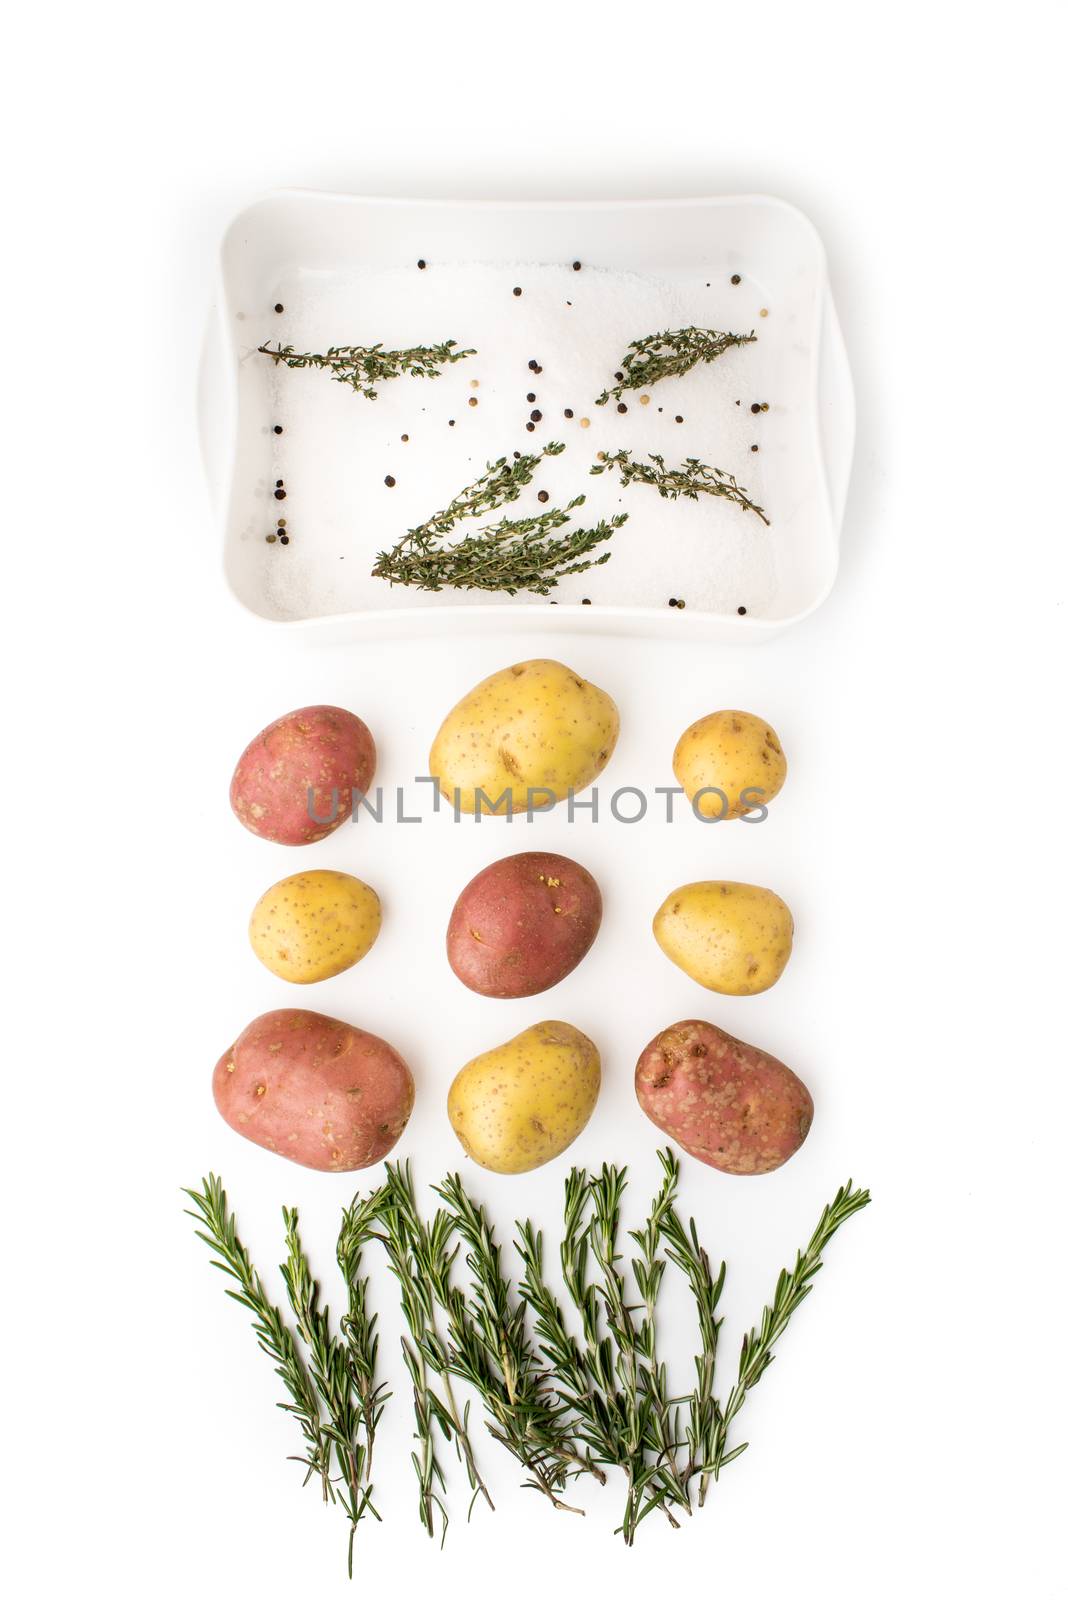 Raw potatoes with spices and herbs on the white background by Deniskarpenkov